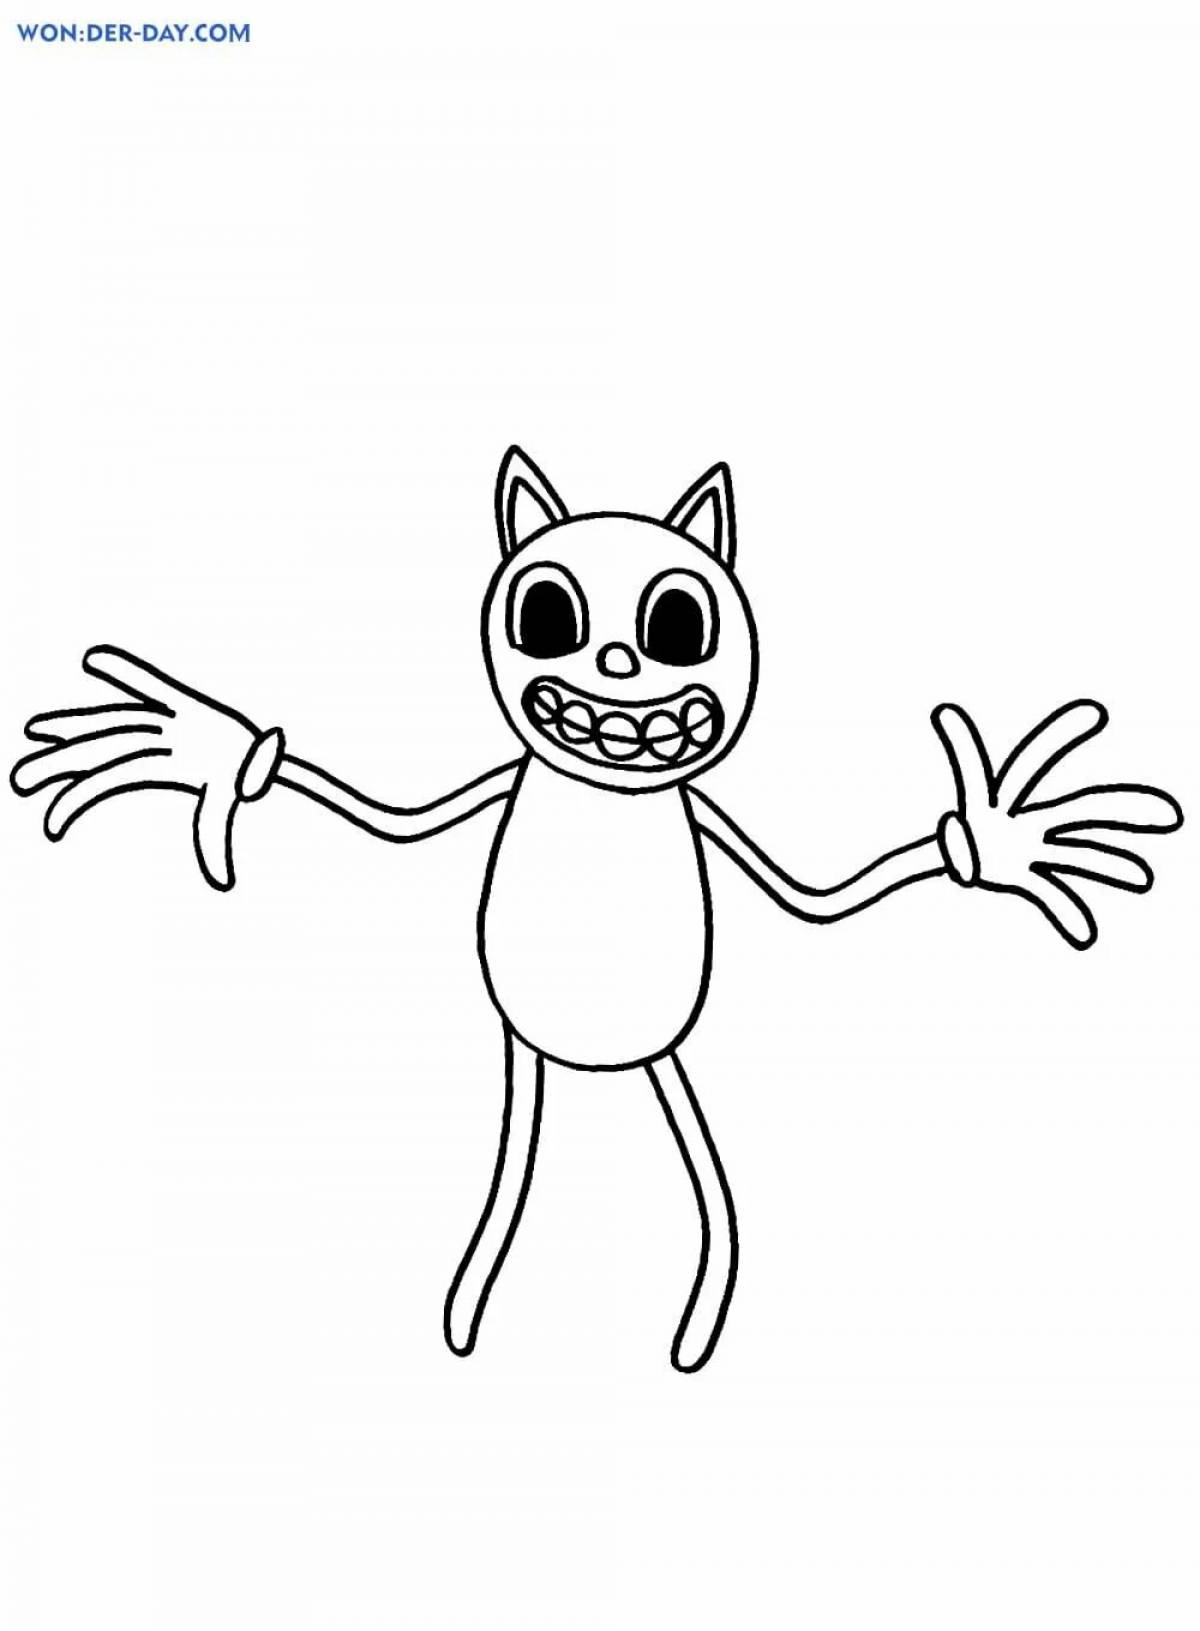 Glittering cartoon cat coloring pages for kids